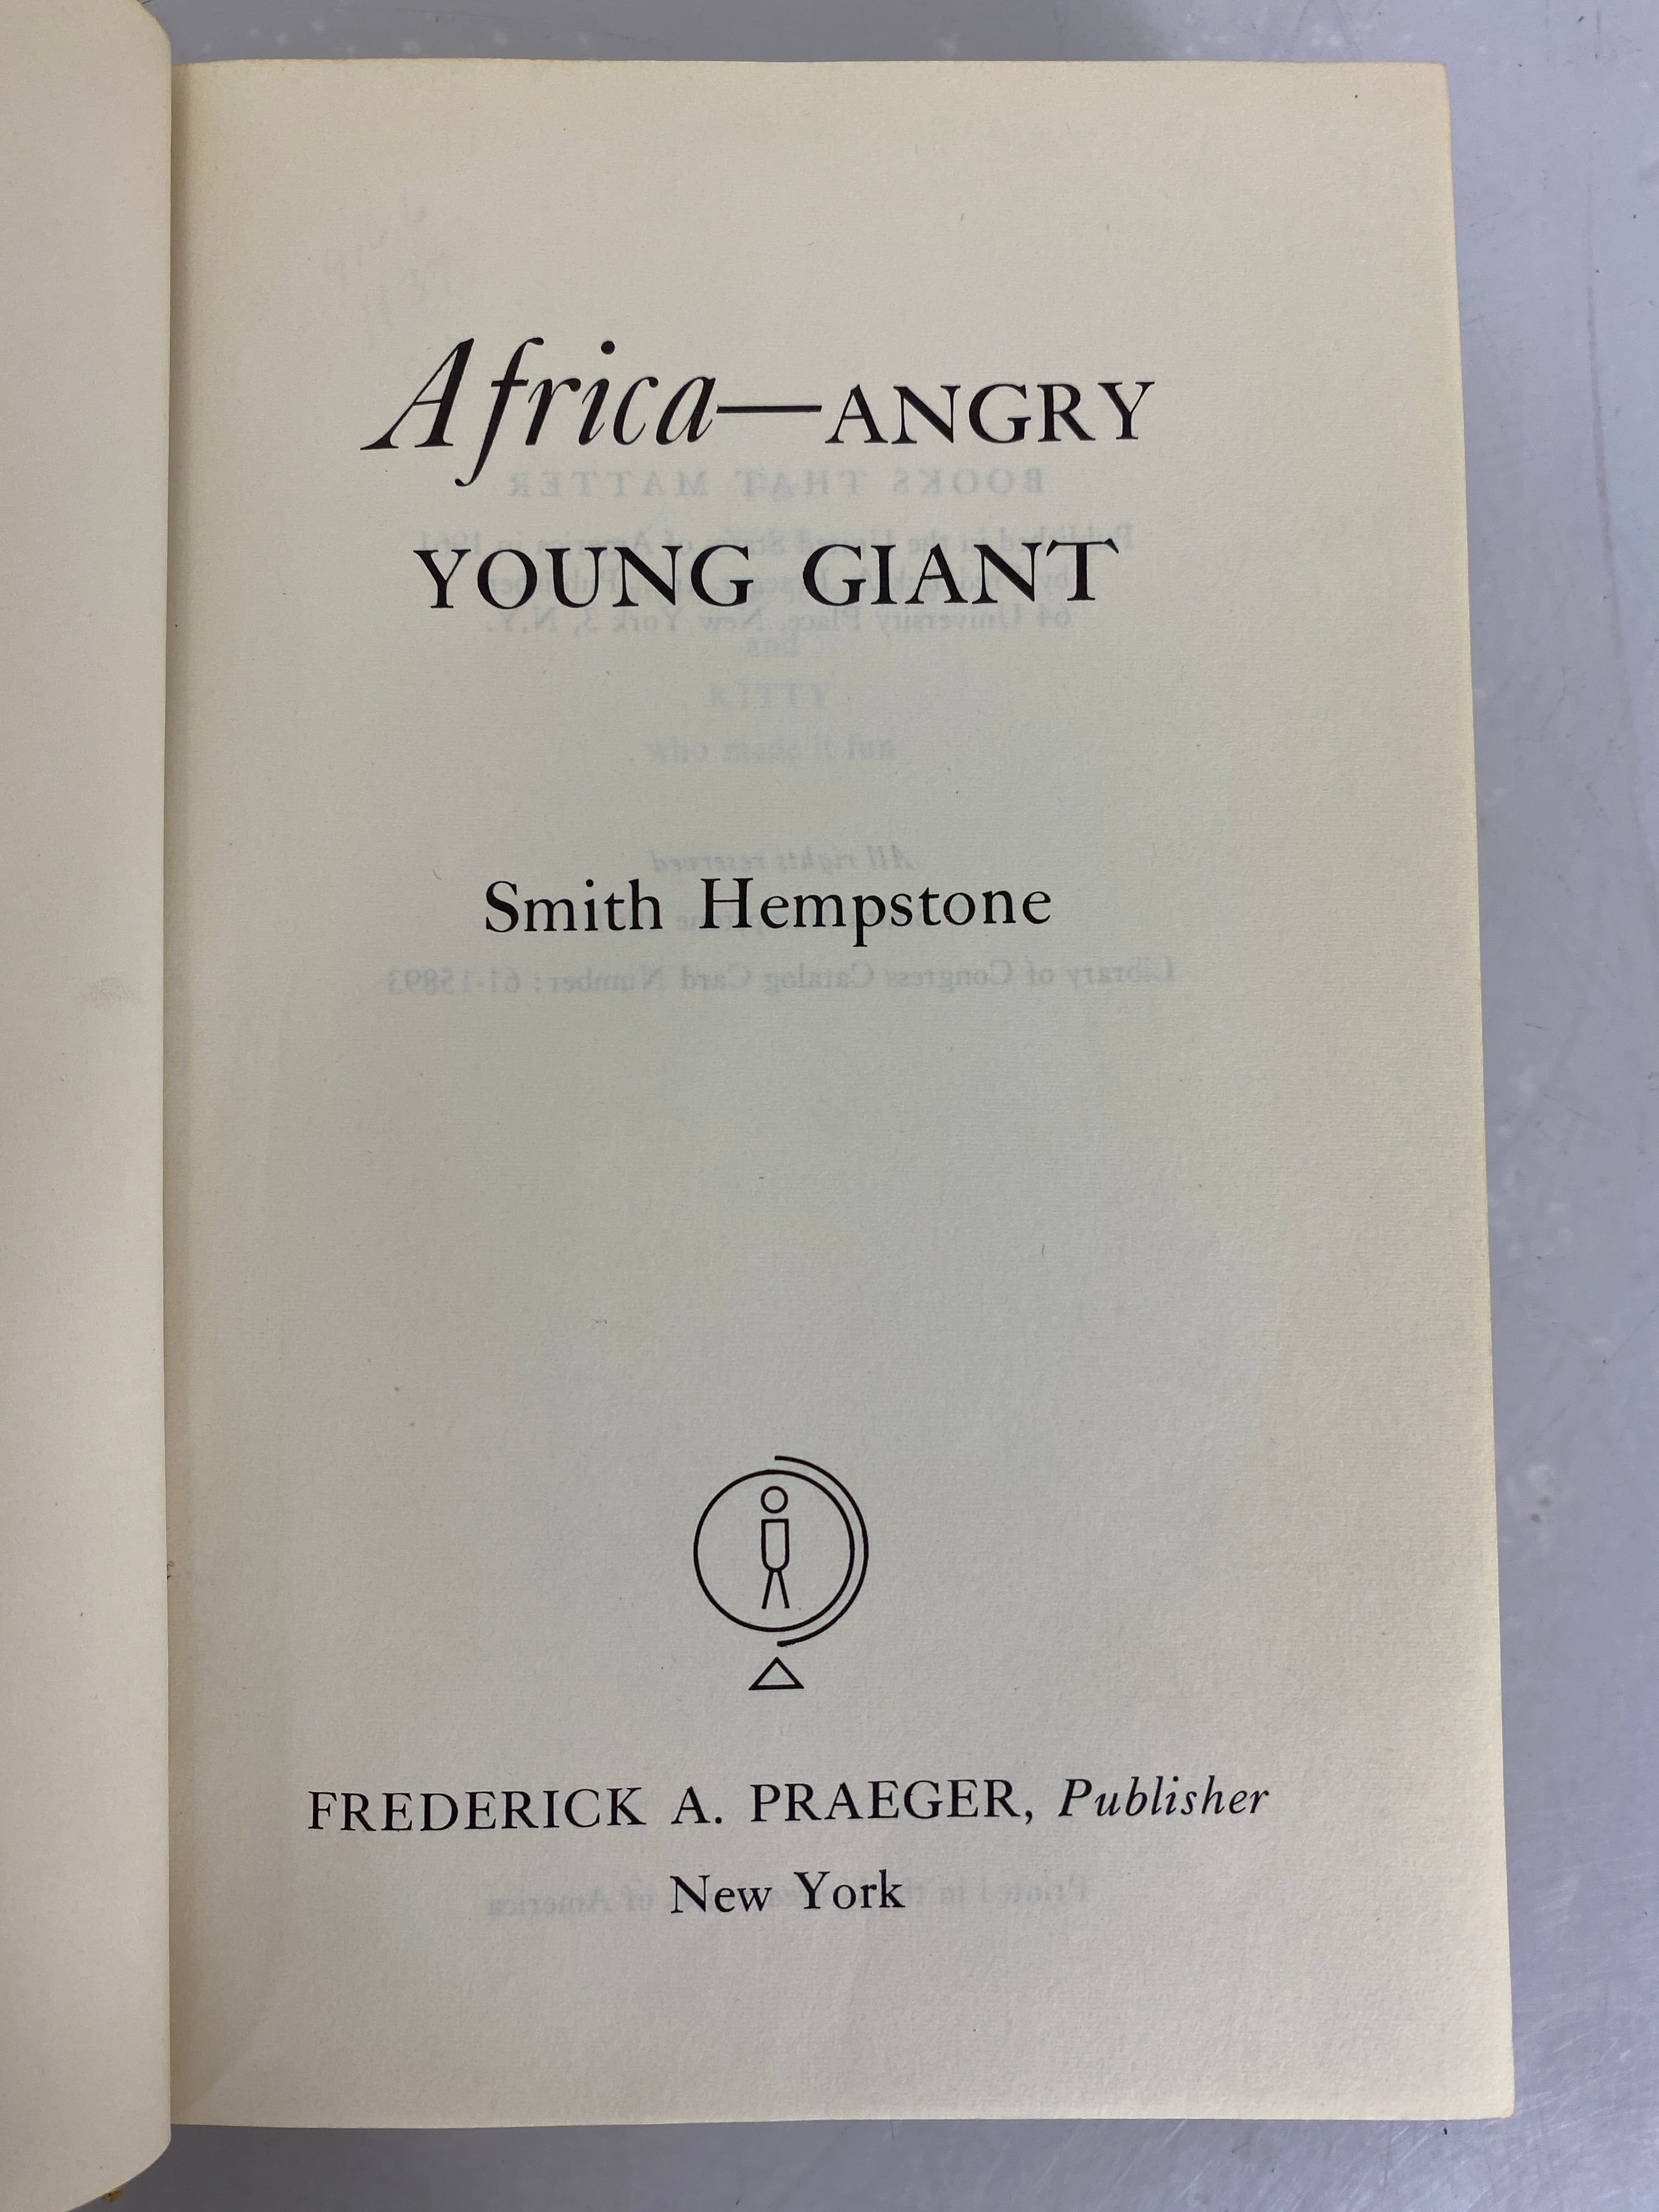 Africa Angry Young Giant by Smith Hempstone 1961 HC DJ Vintage